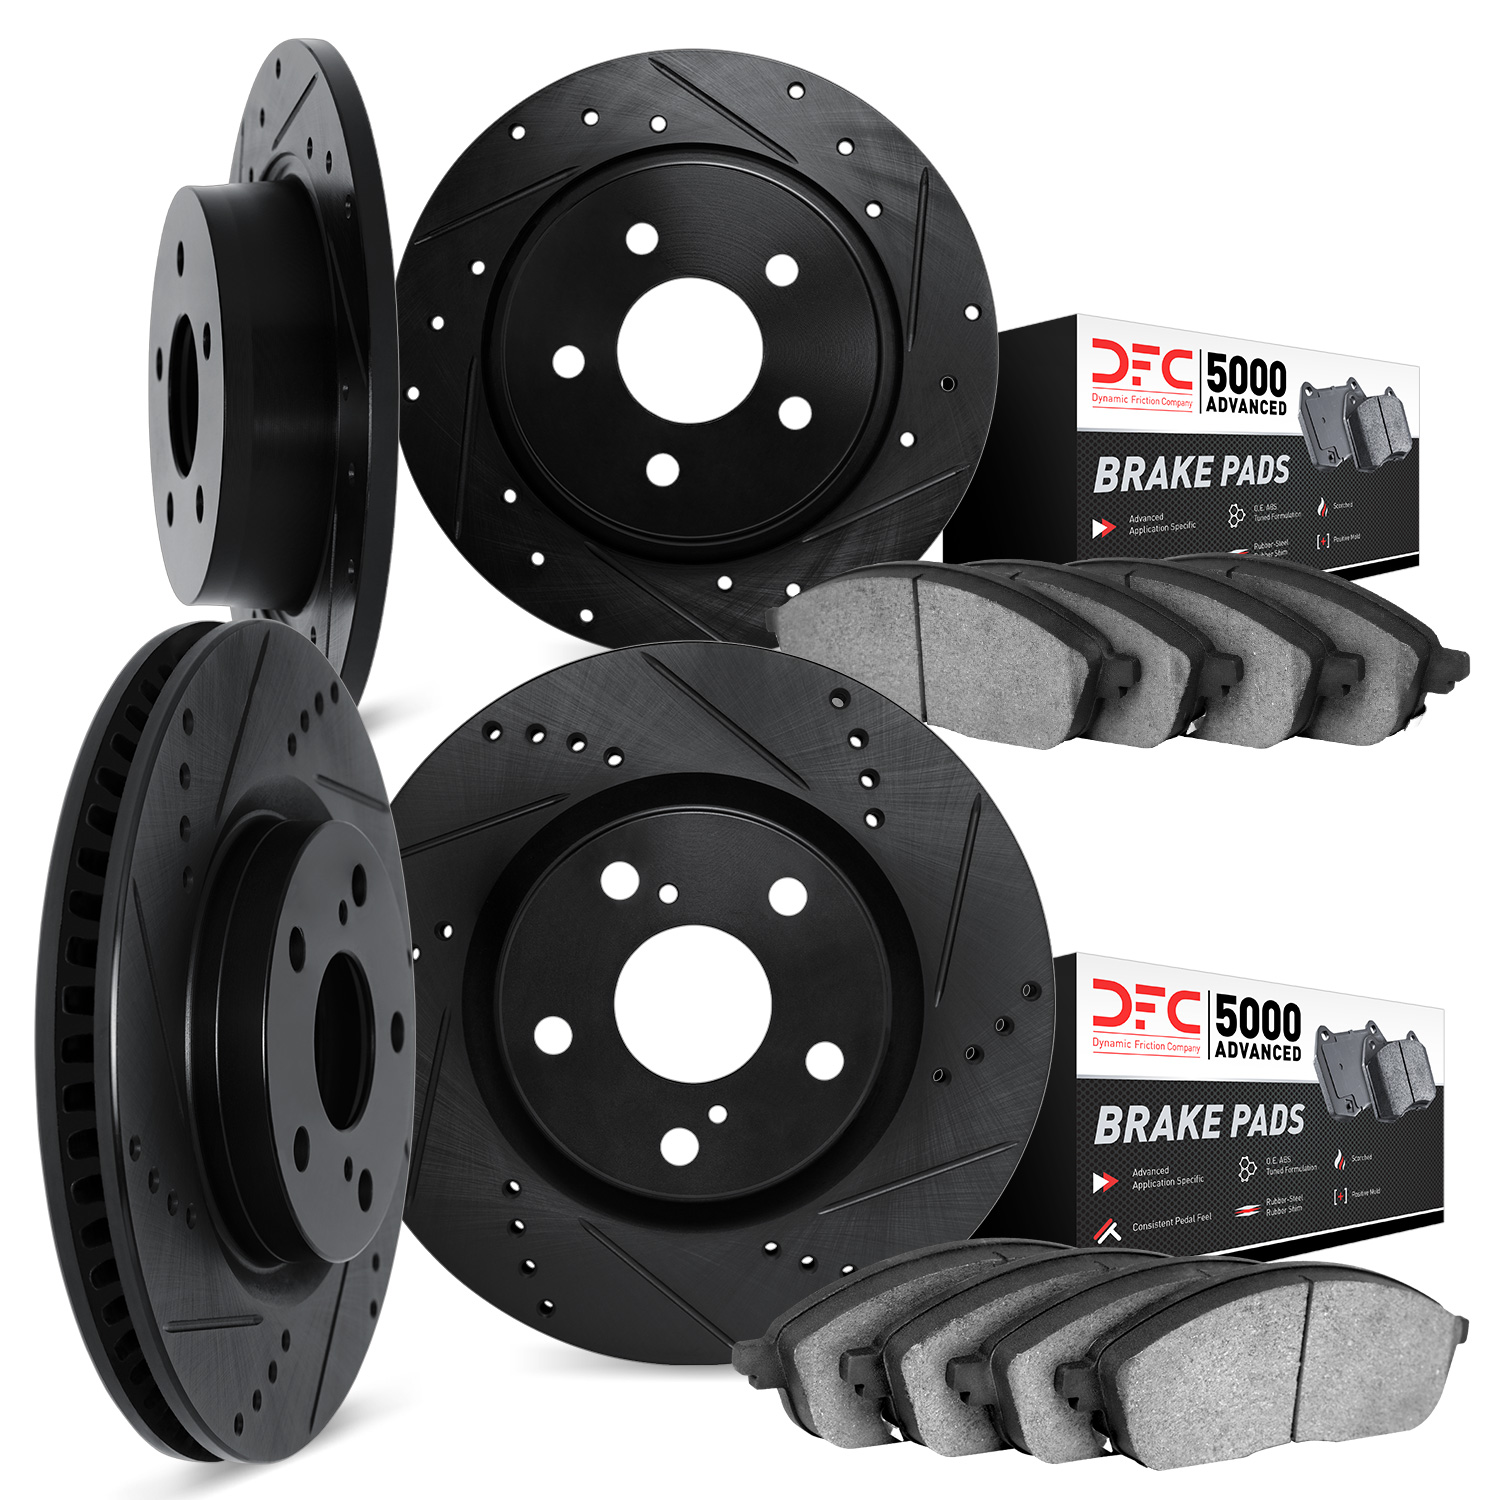 8504-47250 Drilled/Slotted Brake Rotors w/5000 Advanced Brake Pads Kit [Black], 2004-2008 GM, Position: Front and Rear